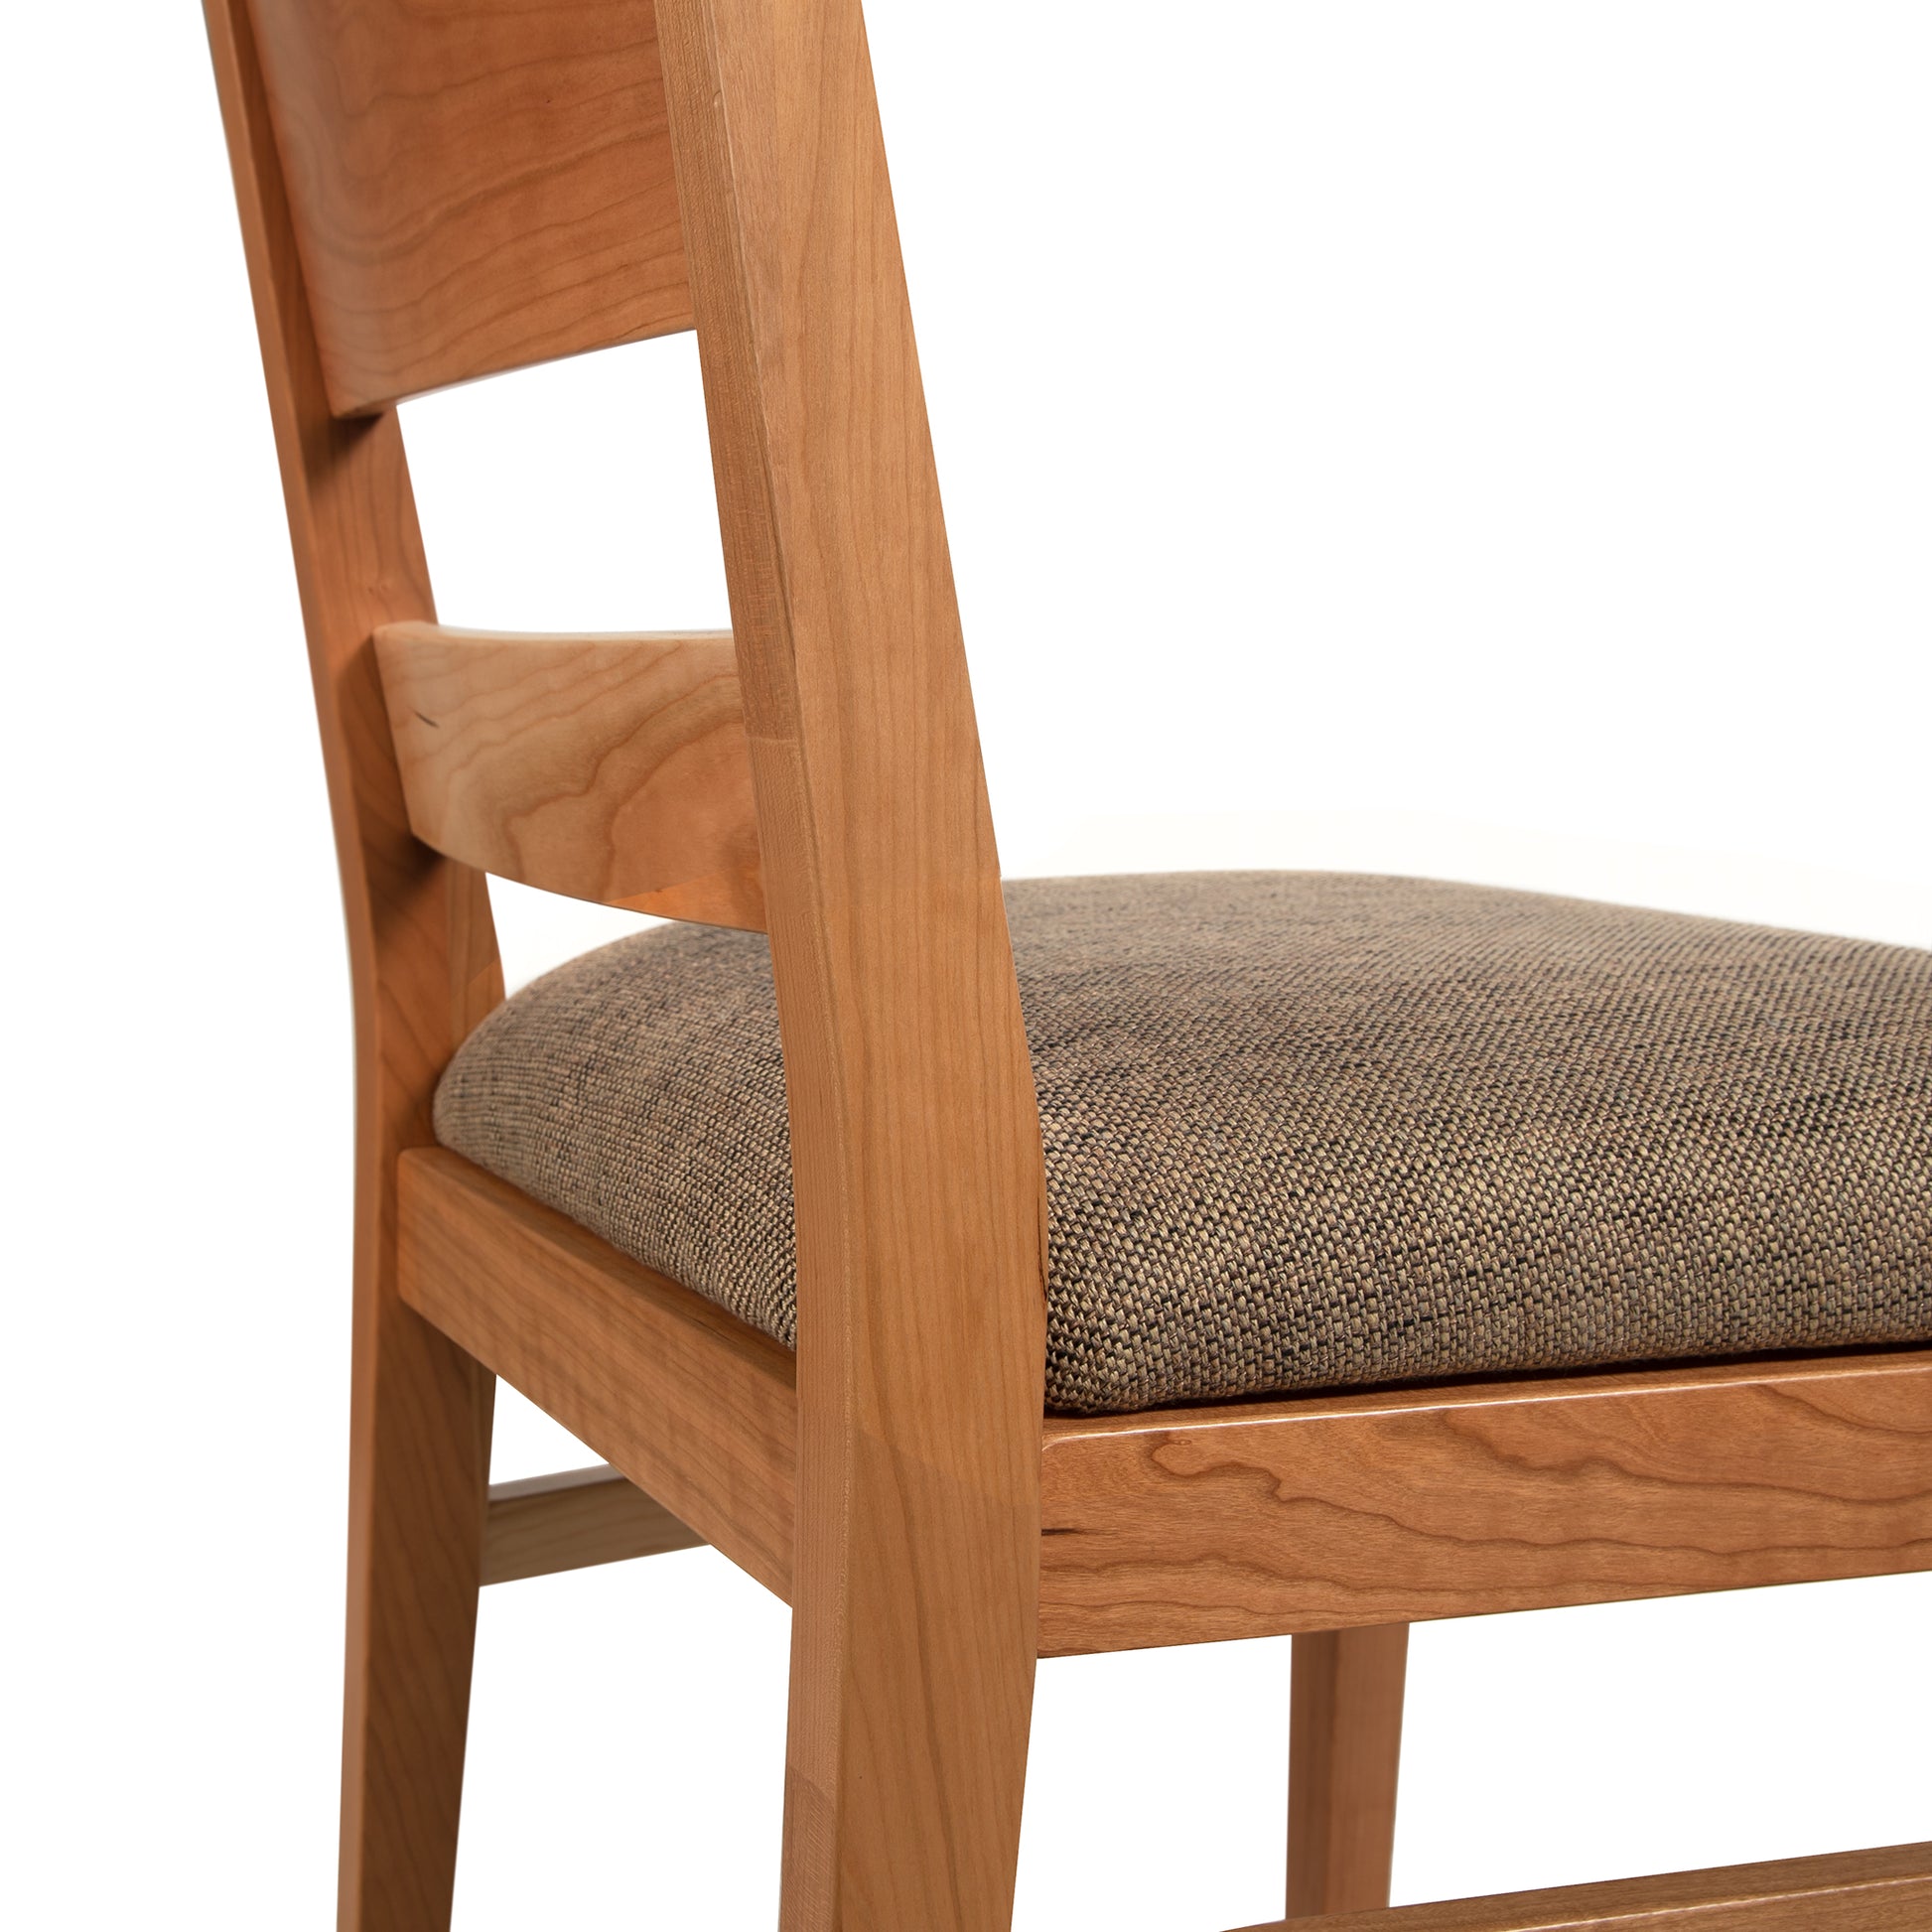 A wooden chair with a tan upholstered seat.